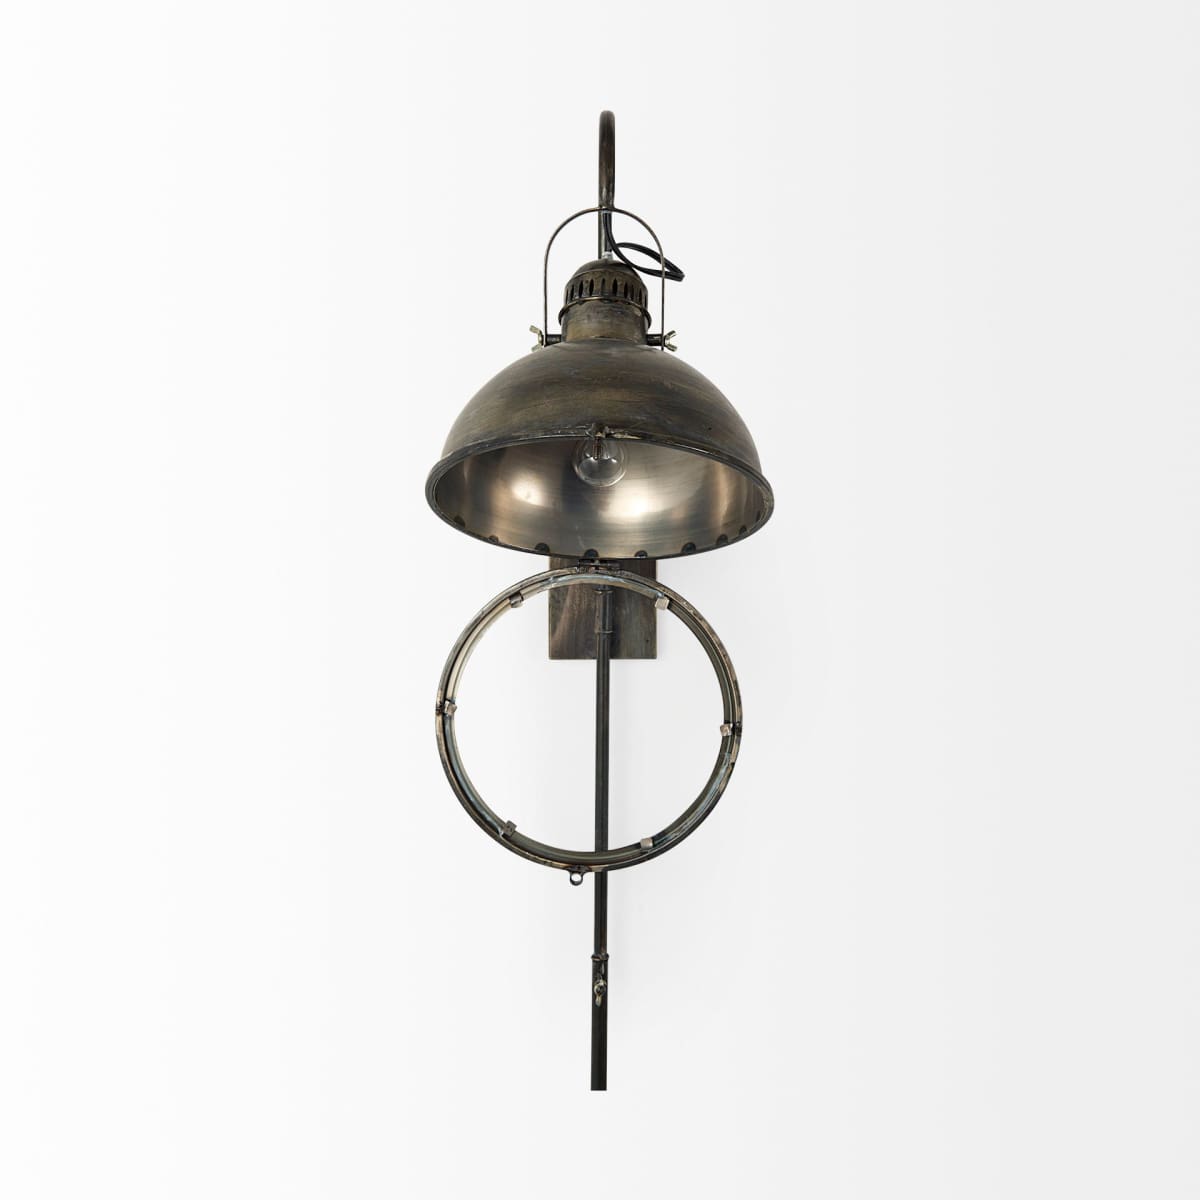 Tazb Wall Sconce Gold Metal - wall-fixtures